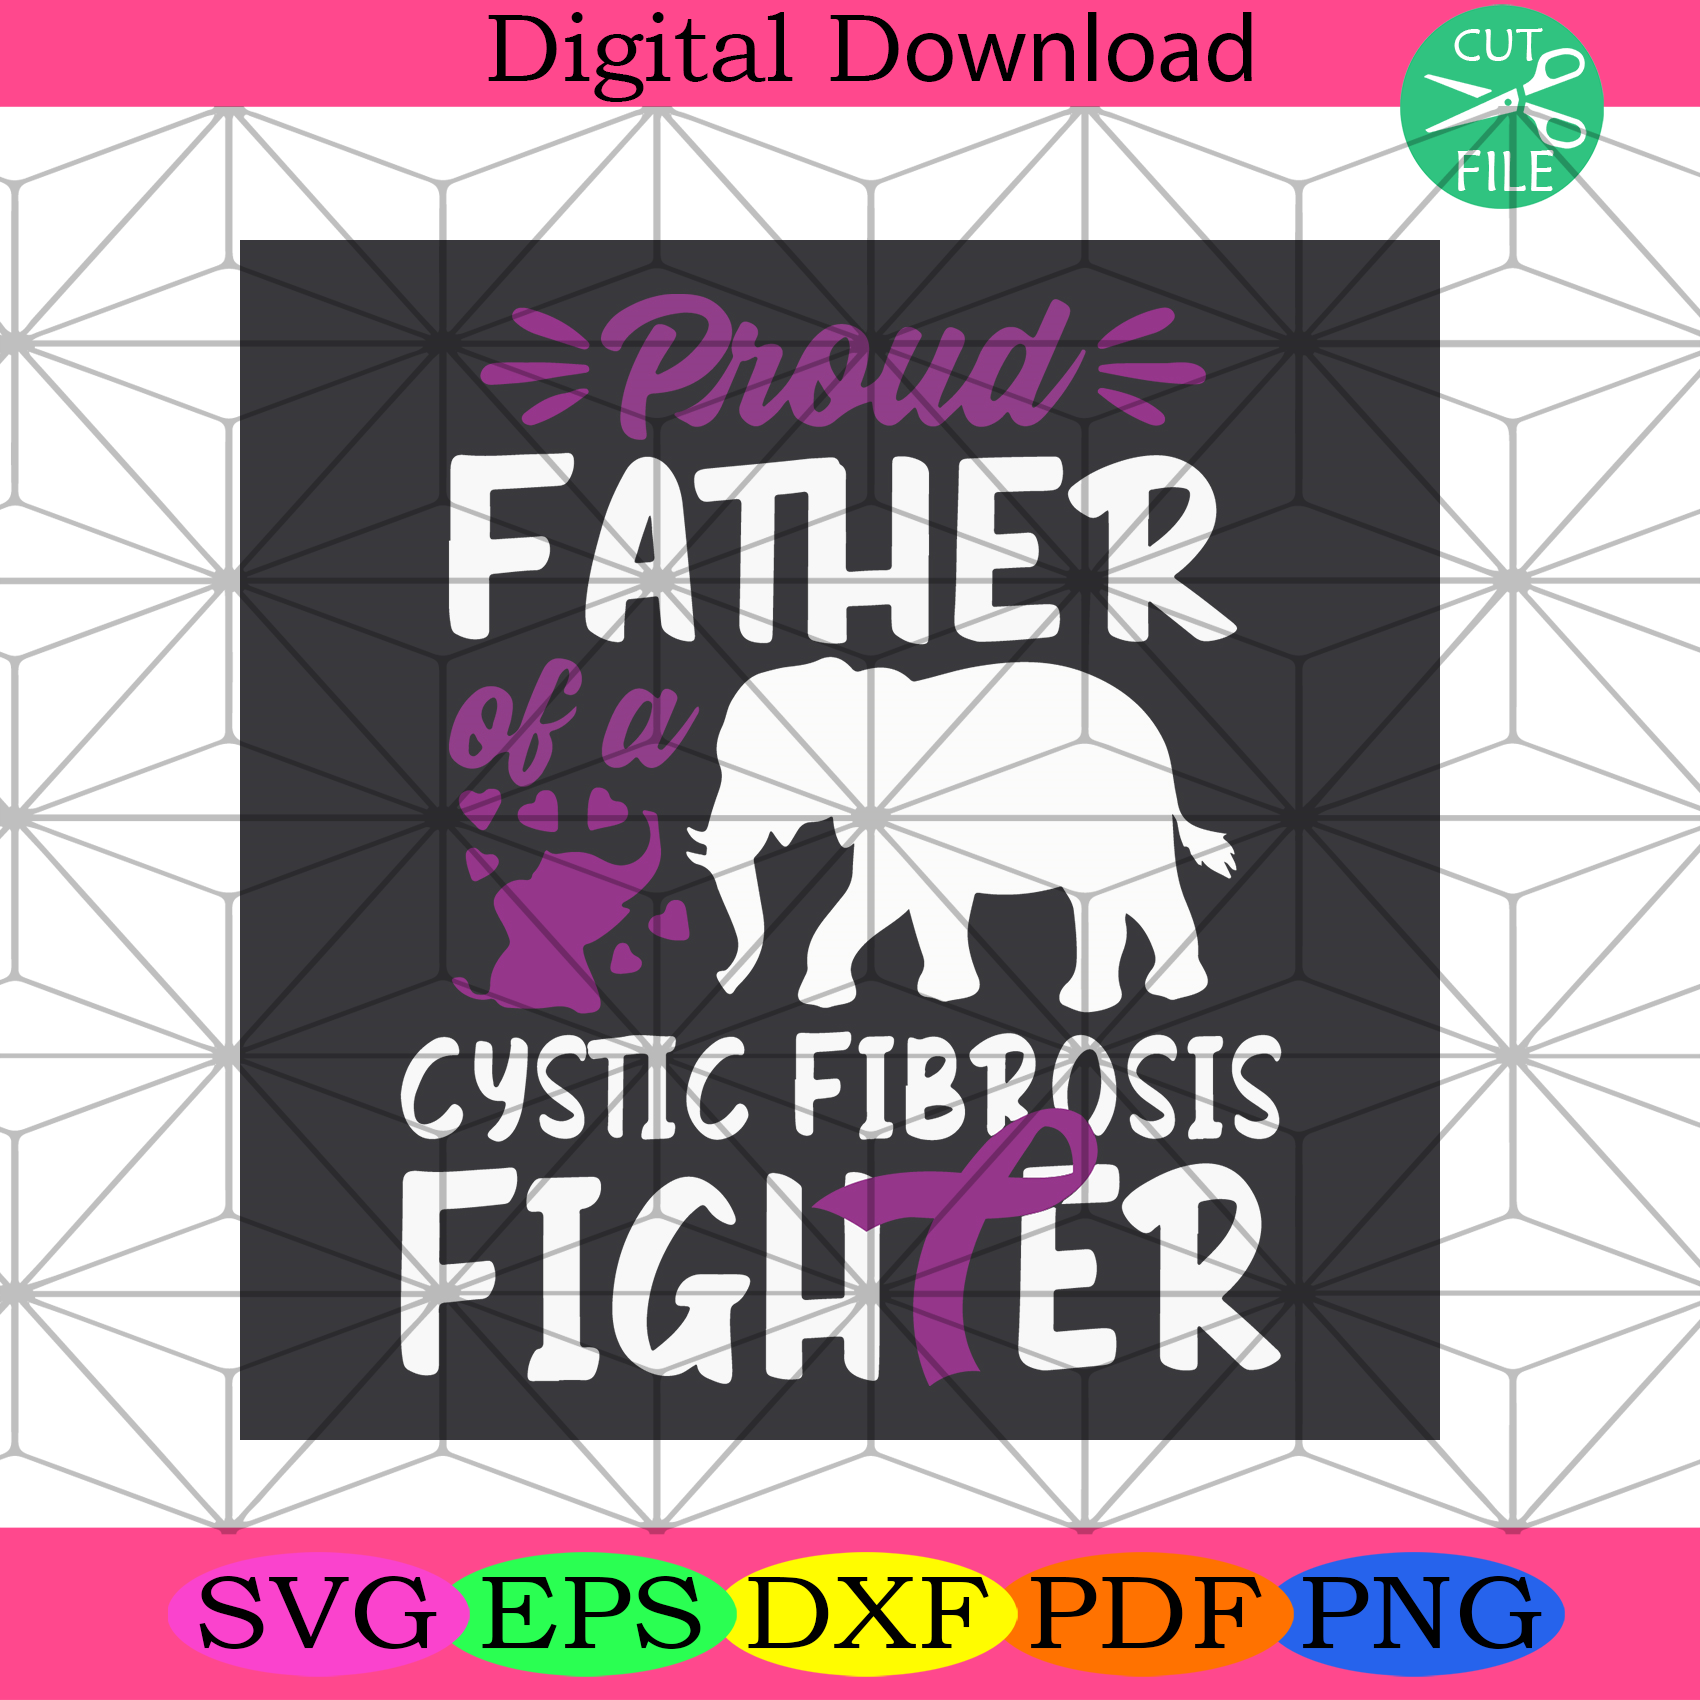 Pround Of A Father Cystic Fibrosis Fighter Svg Fathers Day Svg